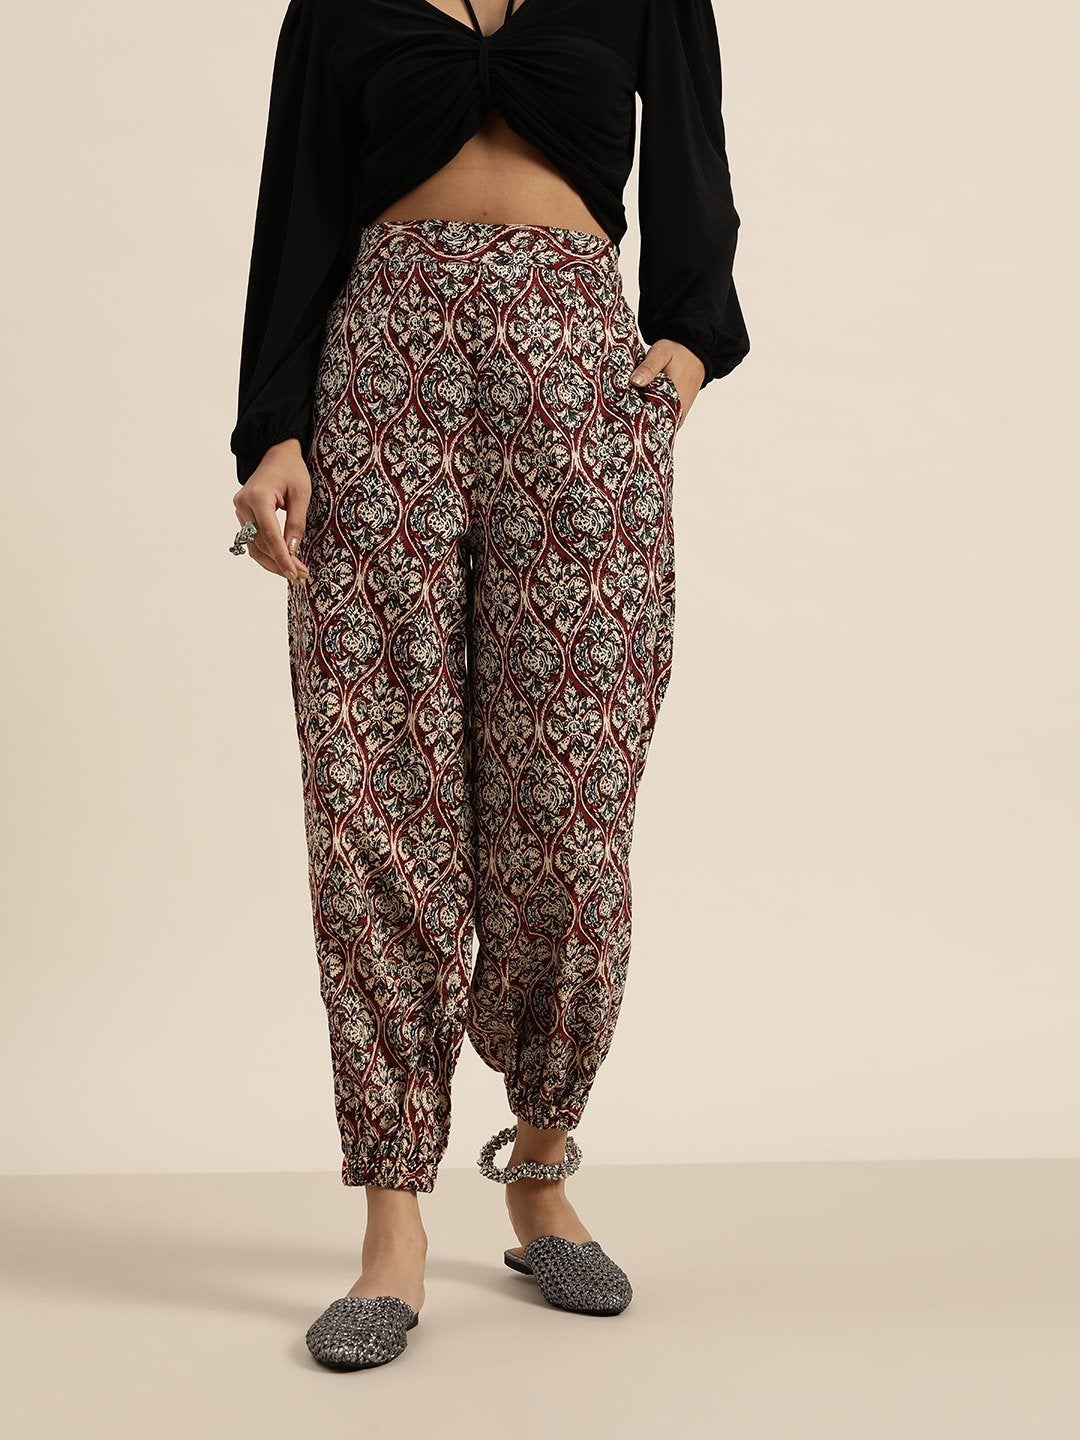 Women's Chocolate Brown Floral Cuffed Pants - SHAE